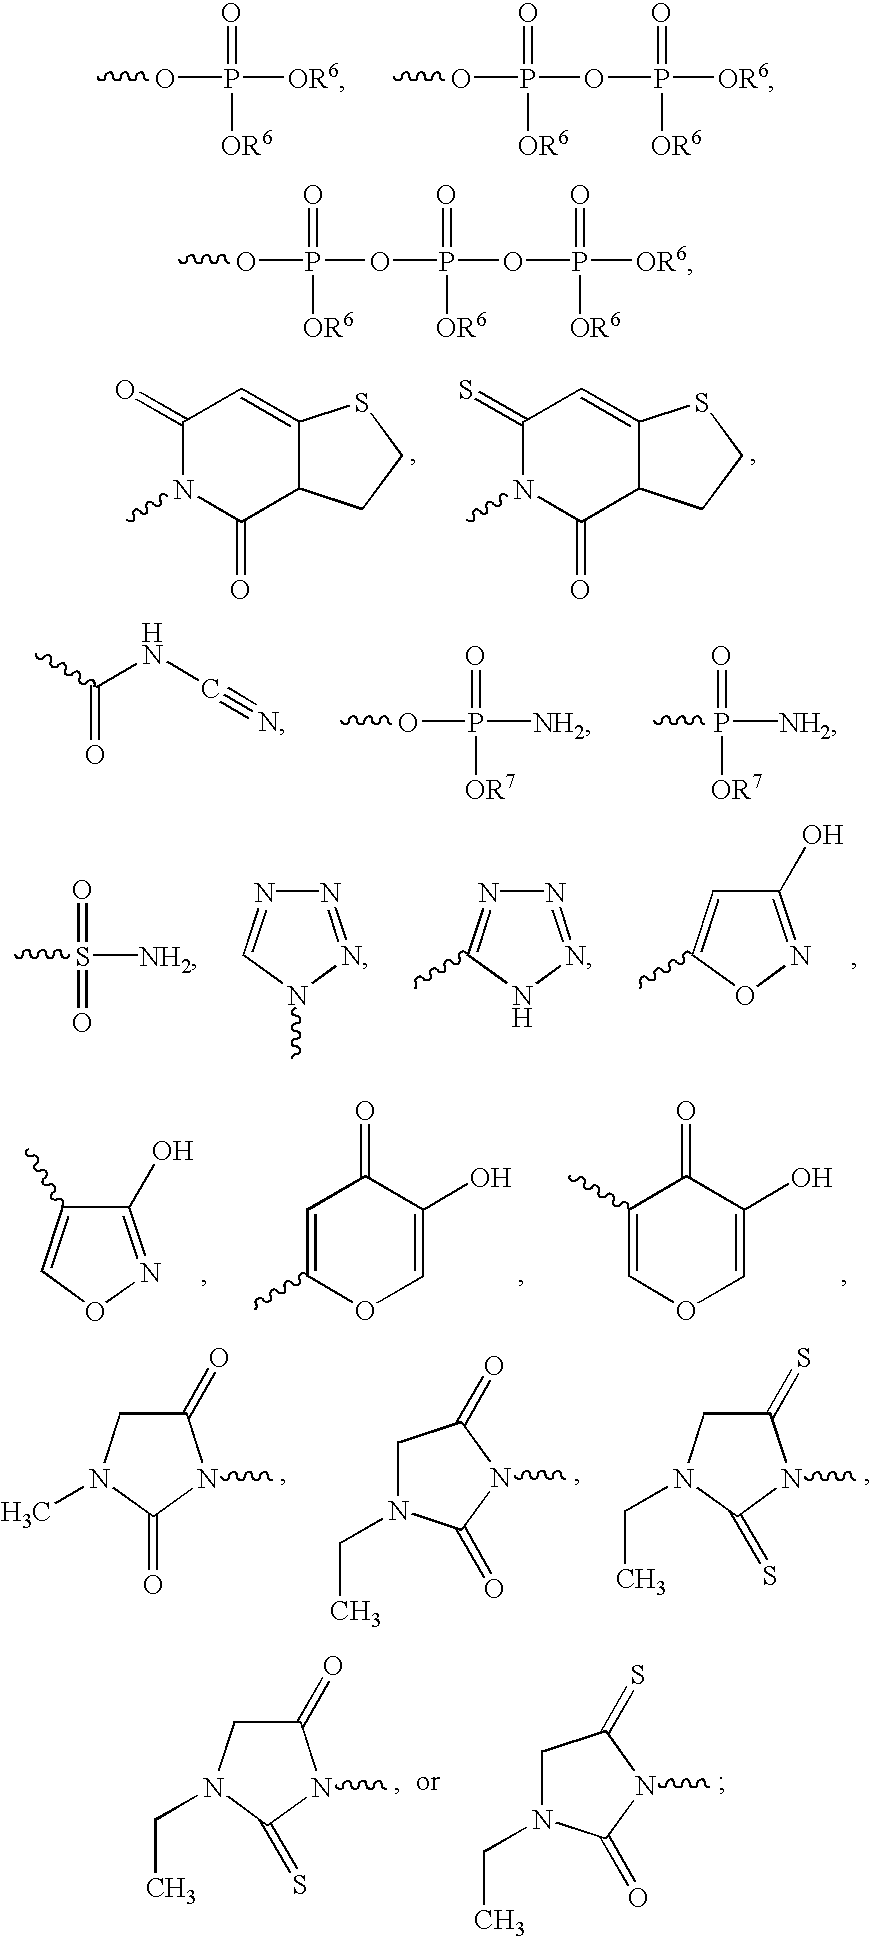 Sulfoxide and bis-sulfoxide compounds and compositions for cholesterol management and related uses